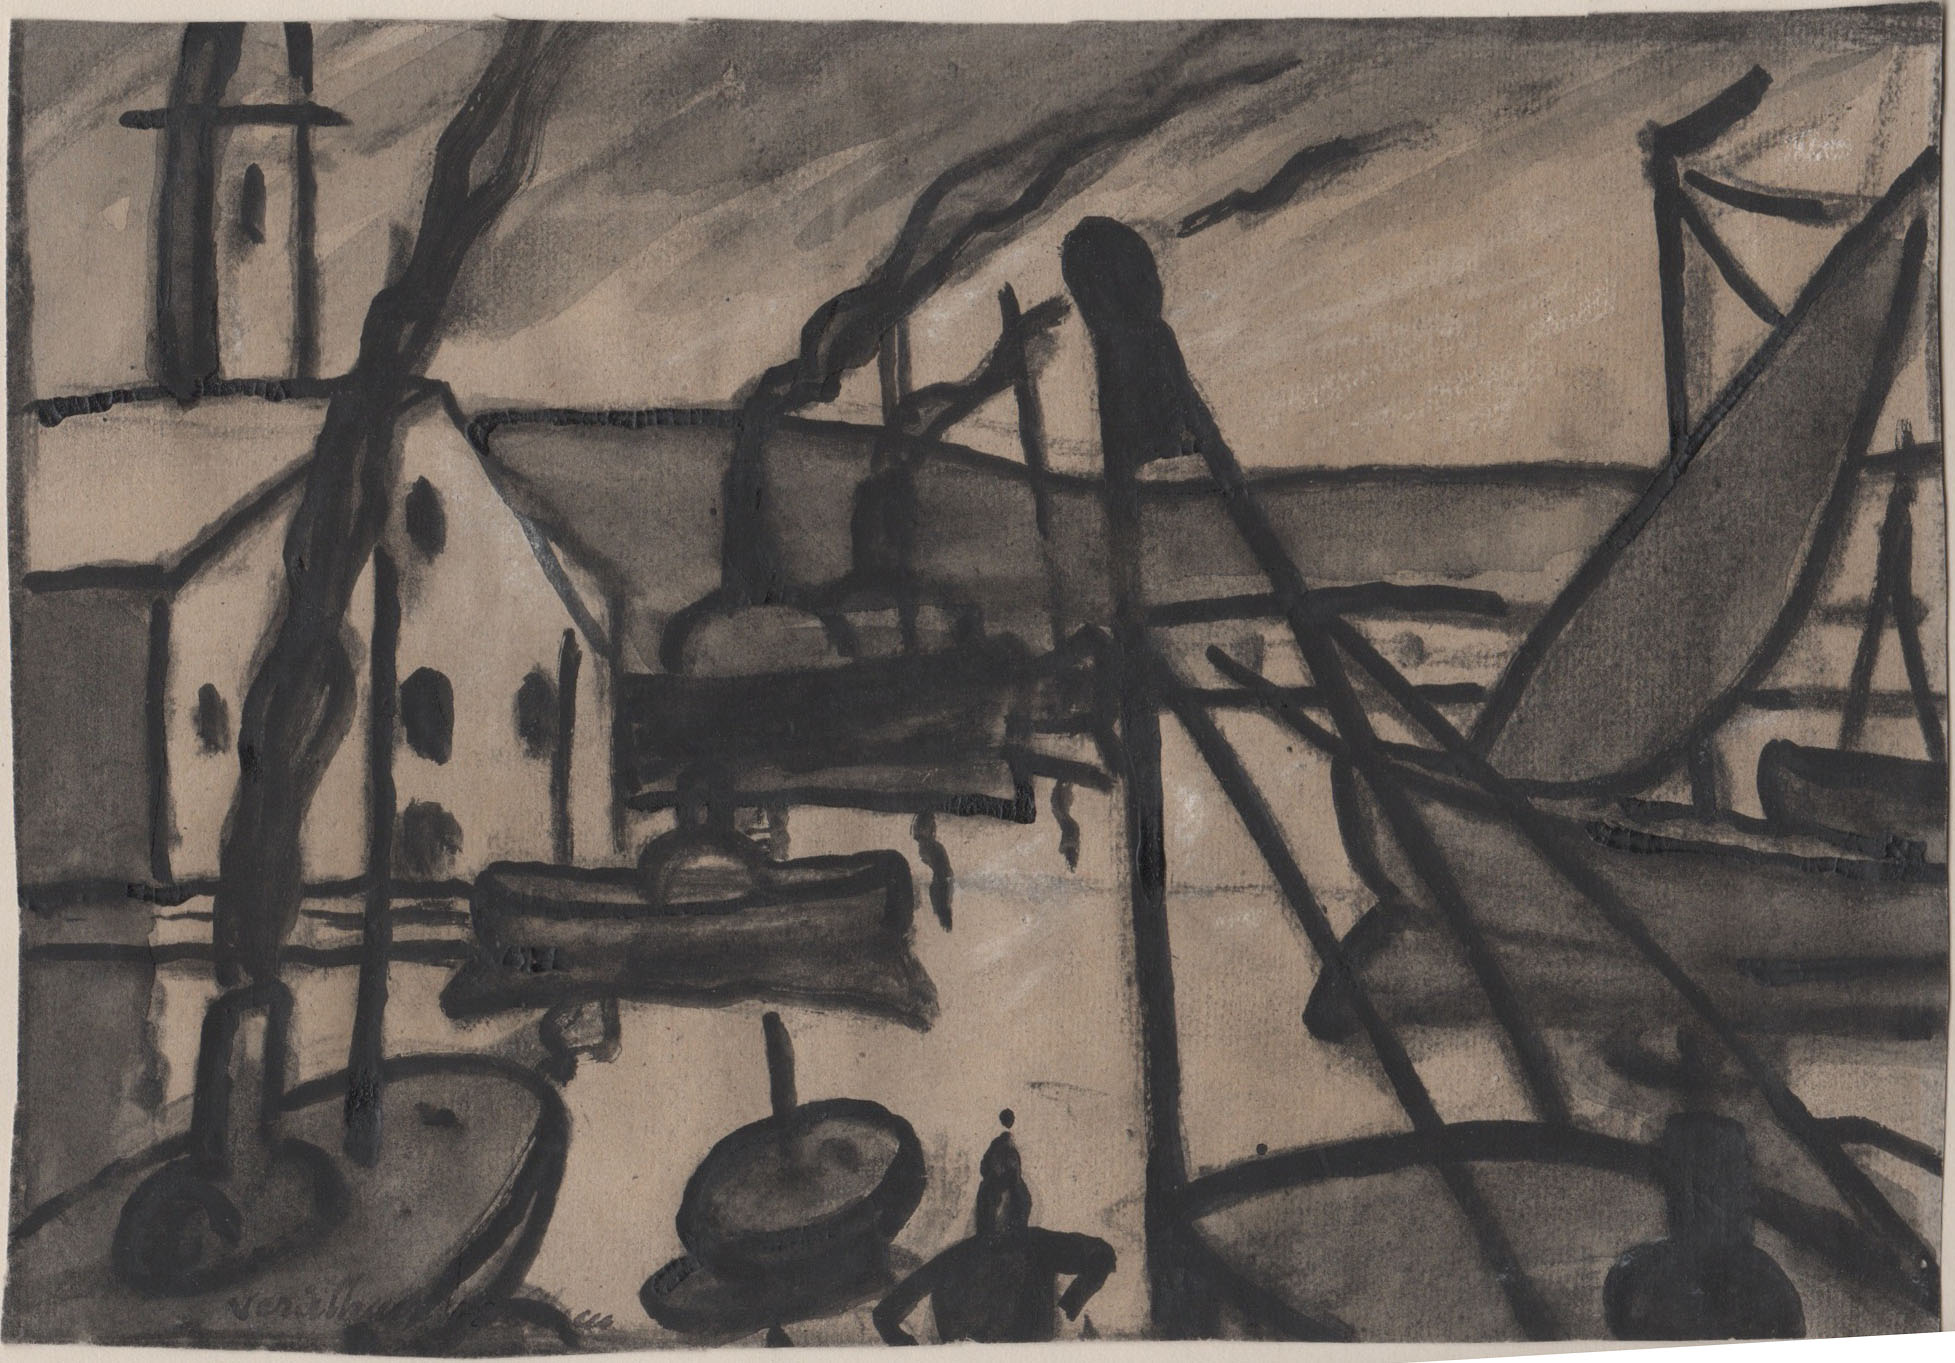 Ink wash and graphite boats on water with a house on the left